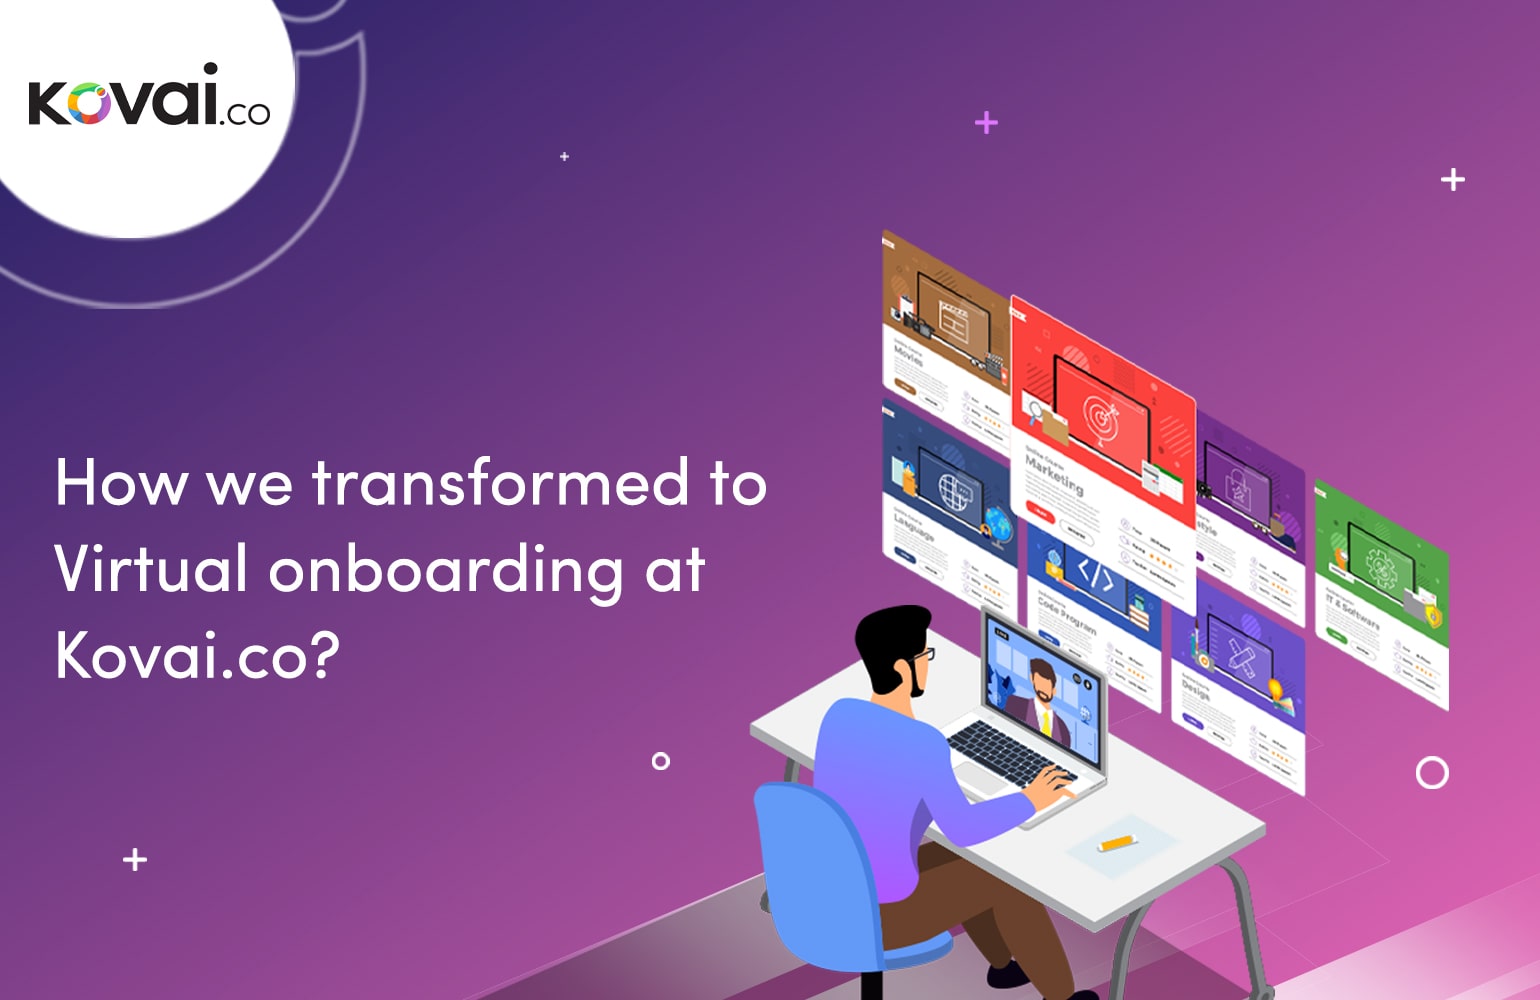 How we transformed to Virtual onboarding at Kovai.co?